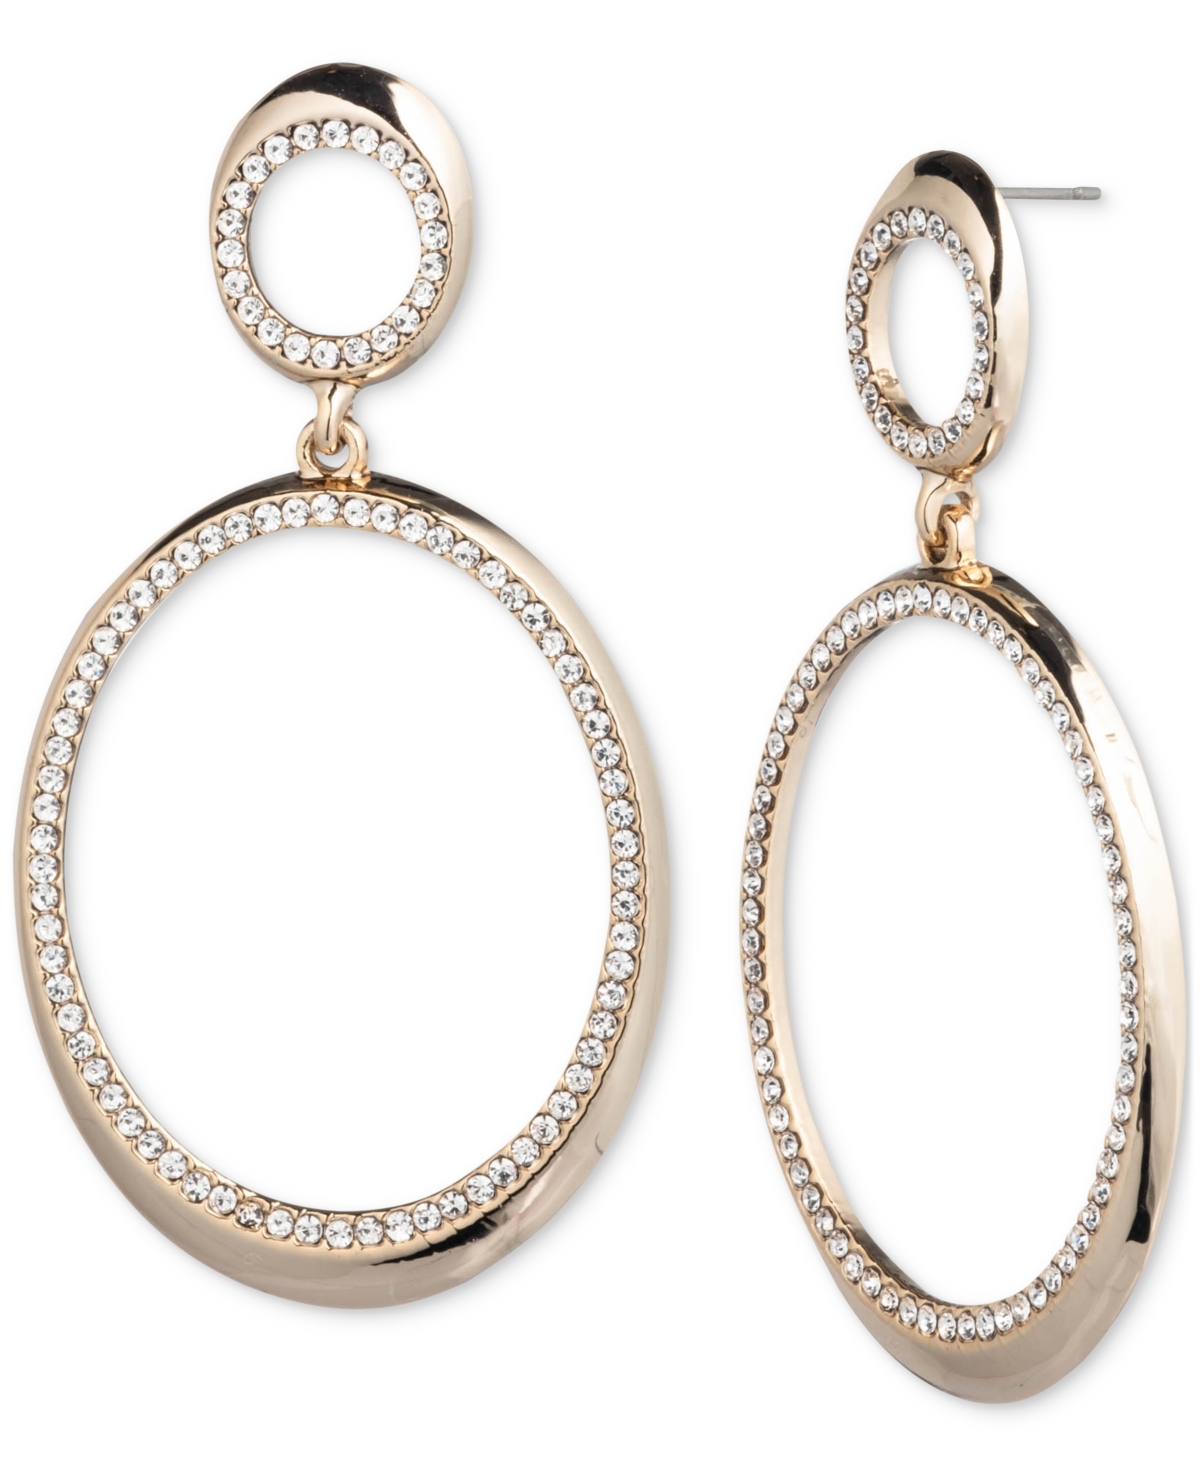 Pave Crystal Open Drop Statement Earrings - Crystal Wh